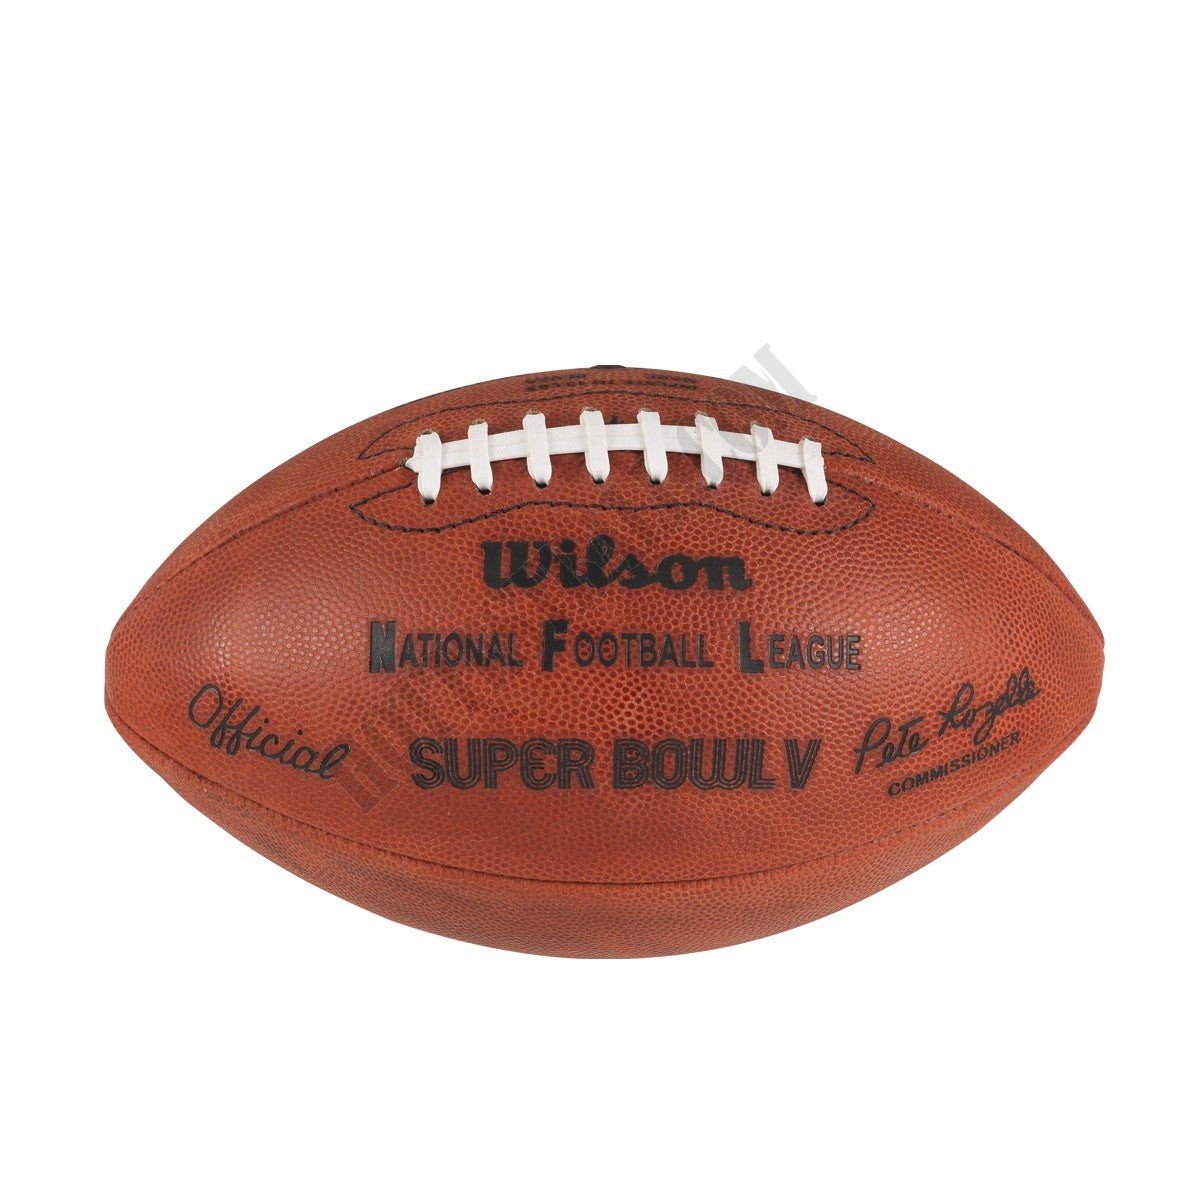 Super Bowl V Game Football - Baltimore Colts ● Wilson Promotions - -0